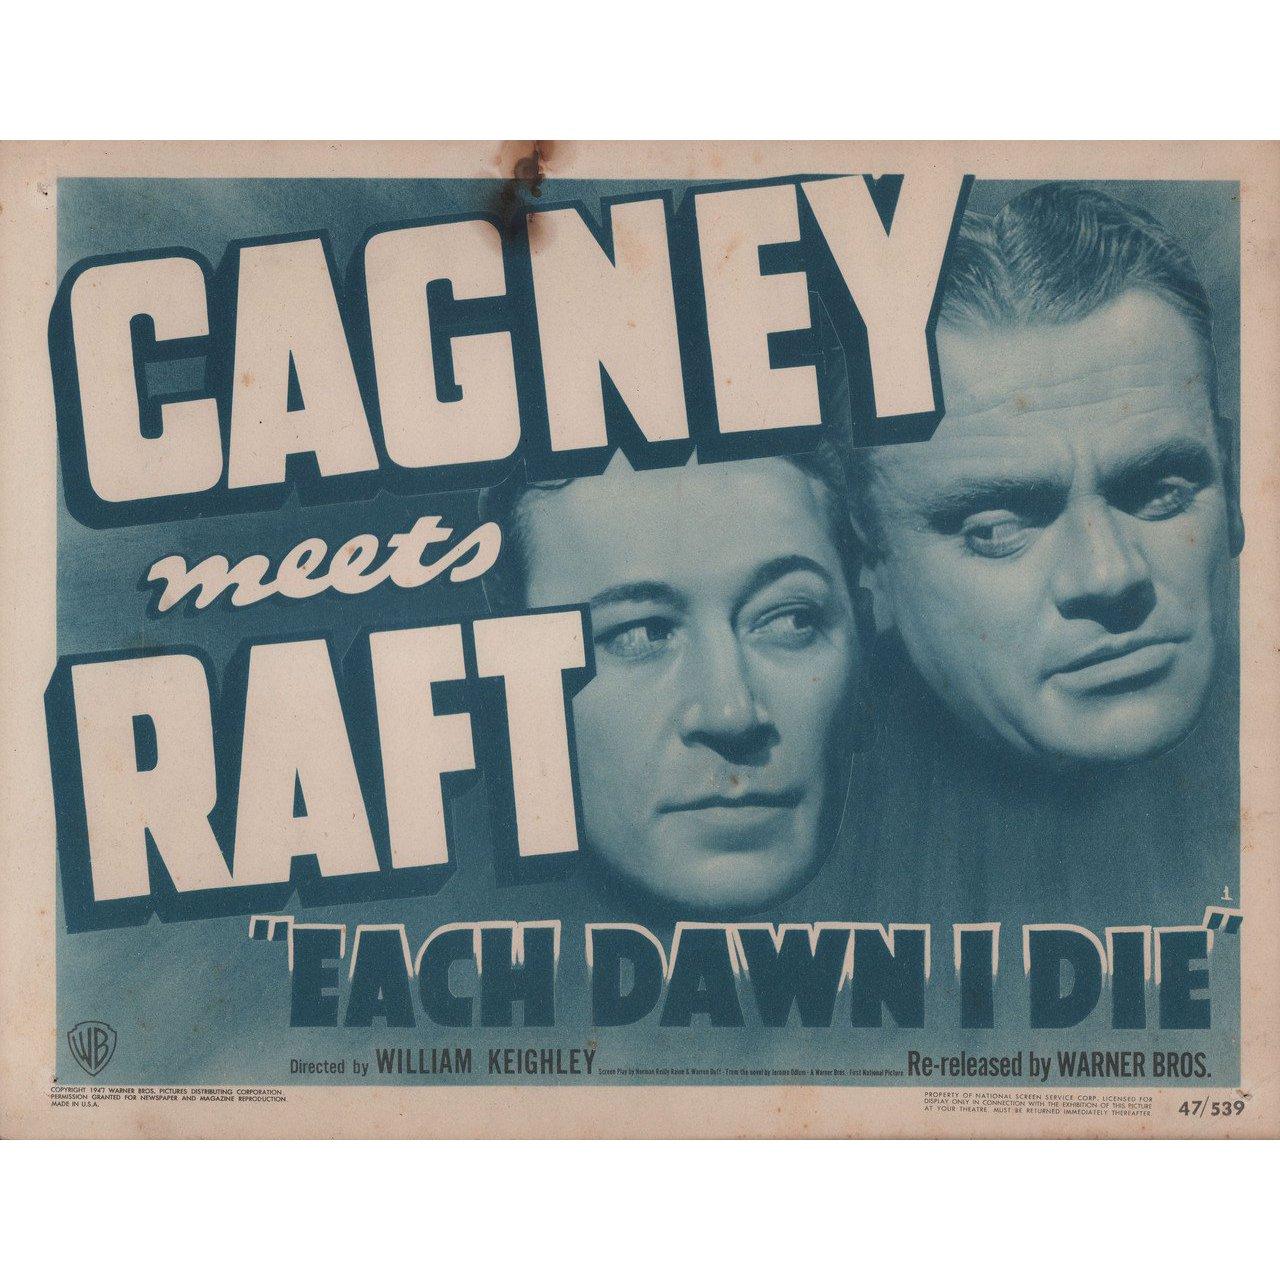 Original 1947 re-release U.S. title card for the 1939 film Each Dawn I Die directed by William Keighley with James Cagney / George Raft / Jane Bryan / George Bancroft. Good-very good condition. Please note: the size is stated in inches and the